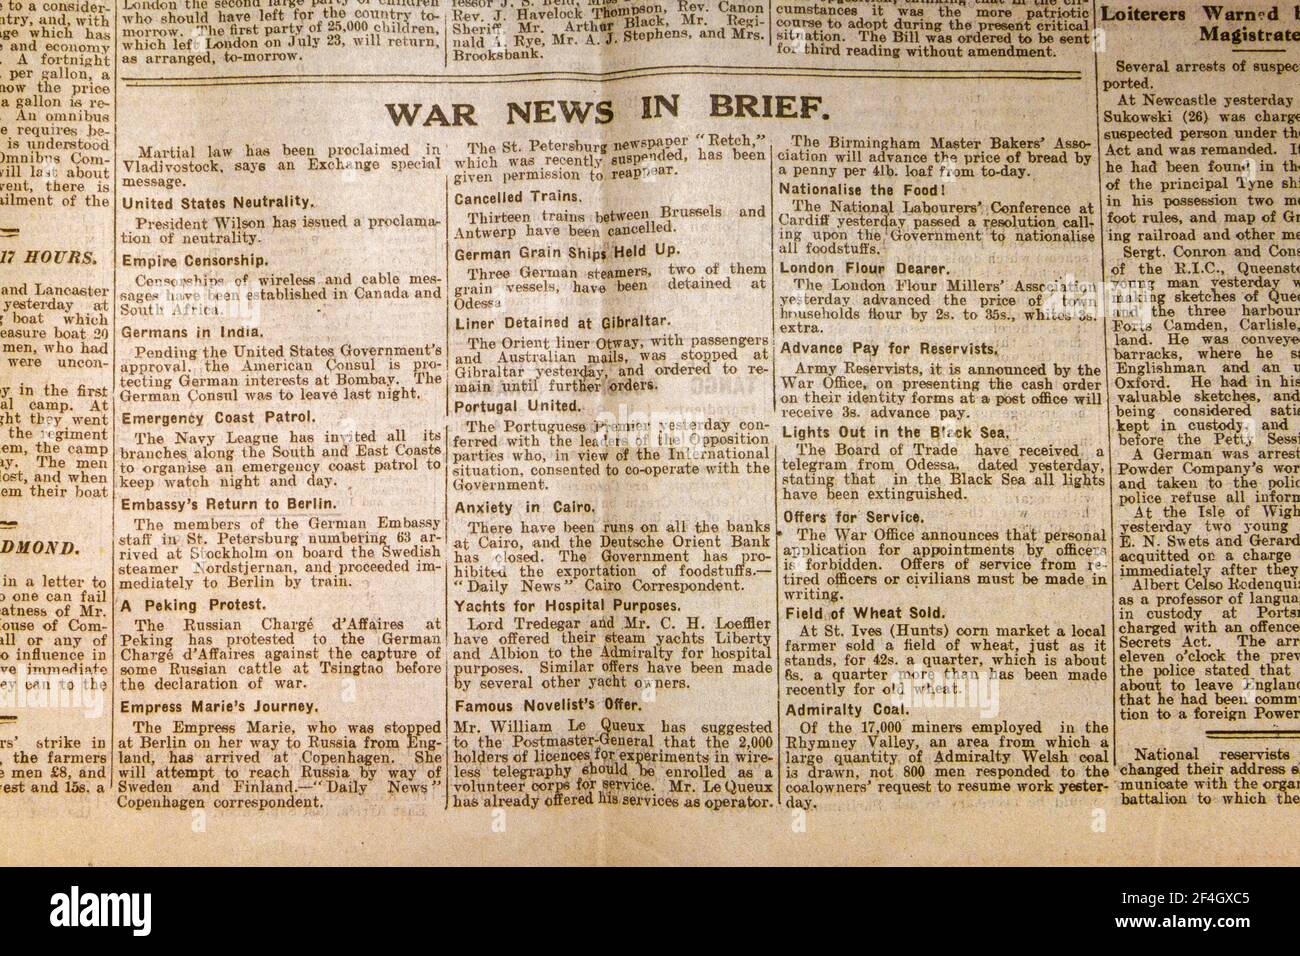 'War News in Brief' sections with short reports from around Europe relating to the outbreak of WWI, the Daily News & Reader newspaper on 5th Aug 1914. Stock Photo